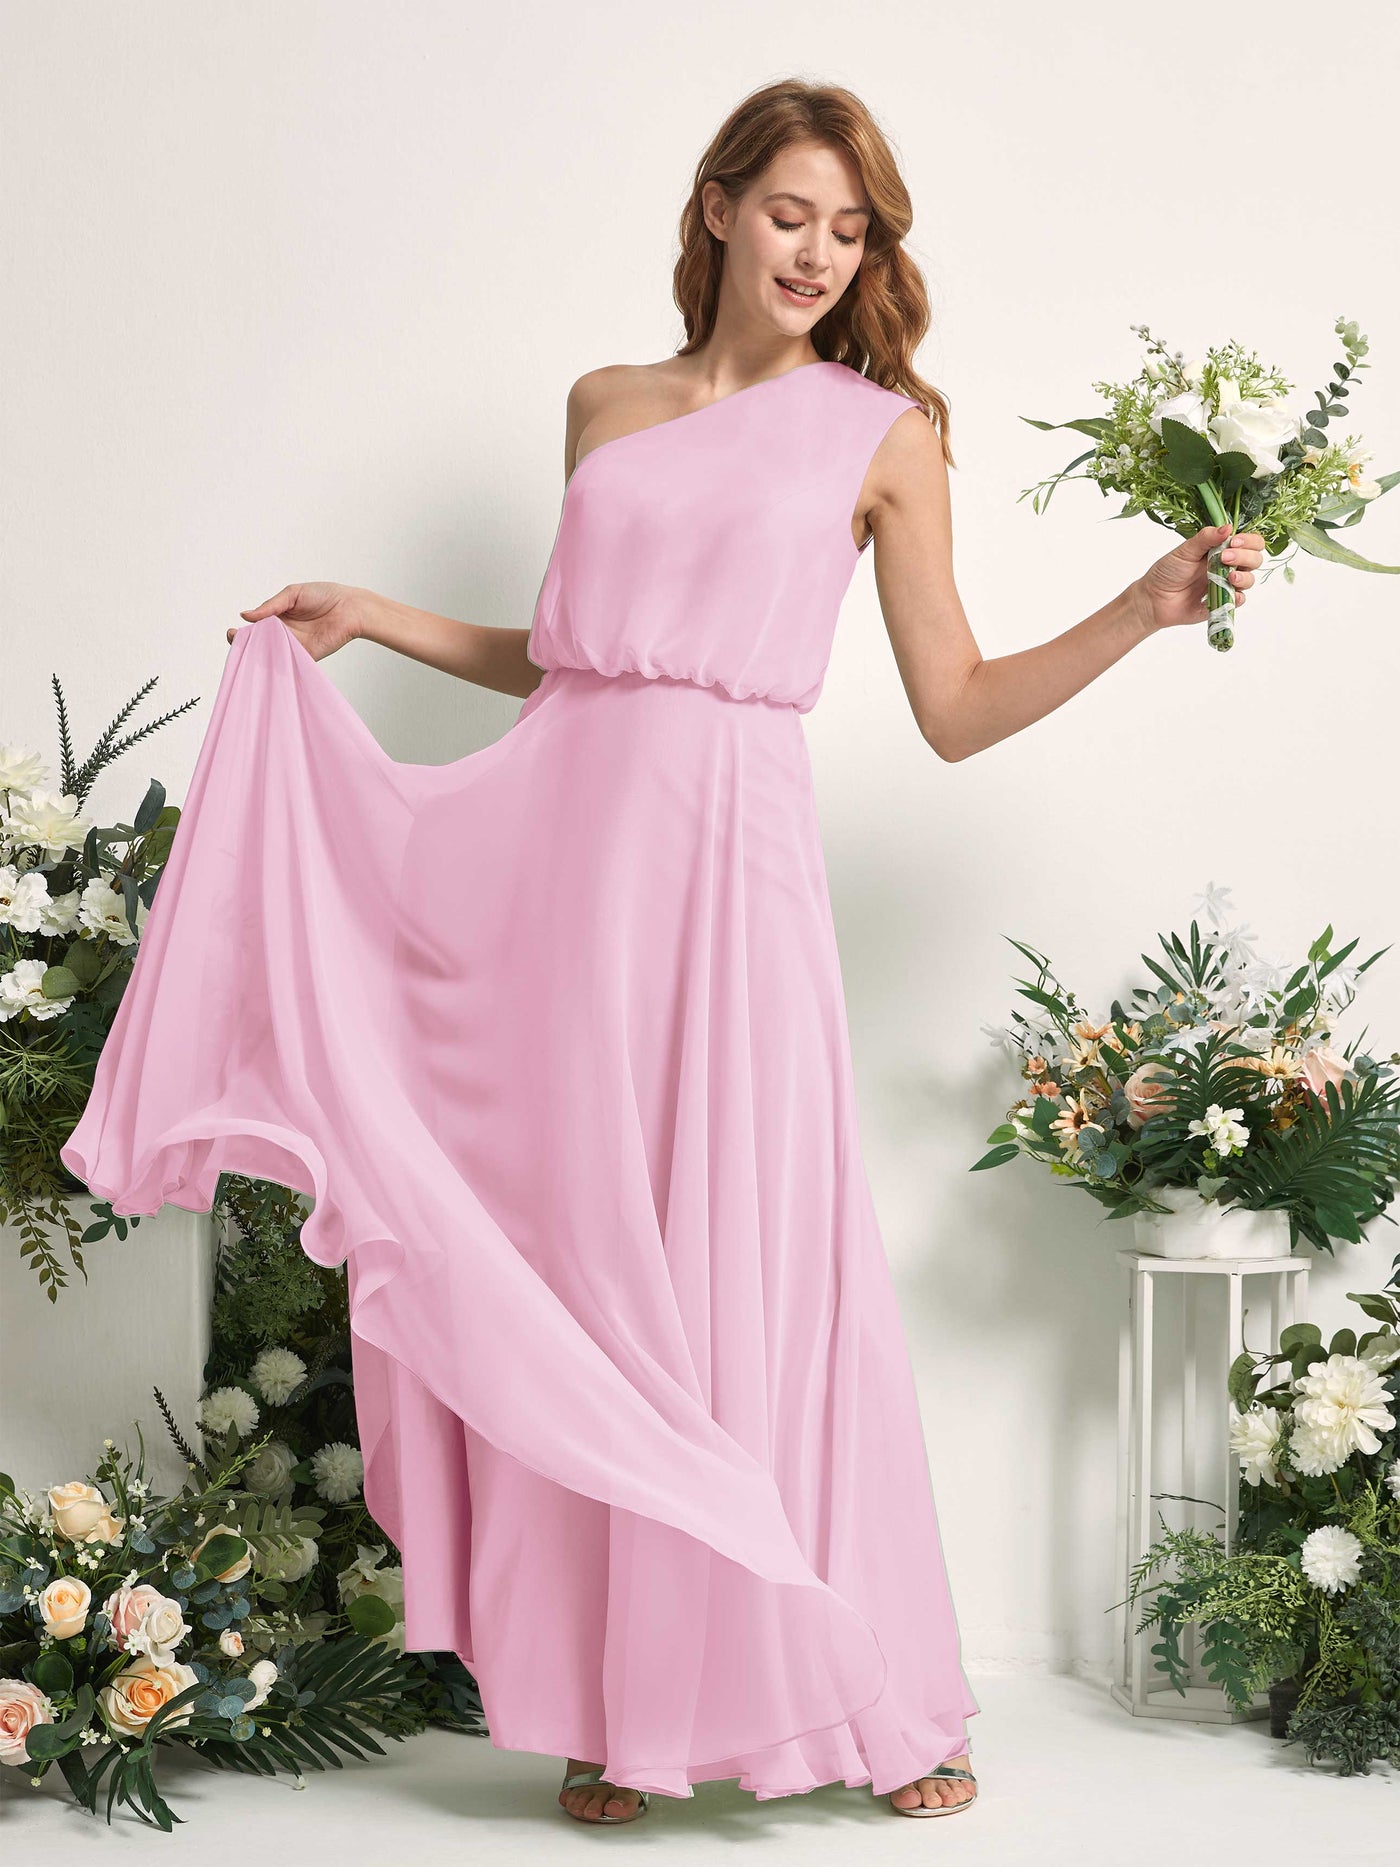 Bridesmaid Dress A-line Chiffon One Shoulder Full Length Sleeveless Wedding Party Dress - Candy Pink (81226839)#color_candy-pink